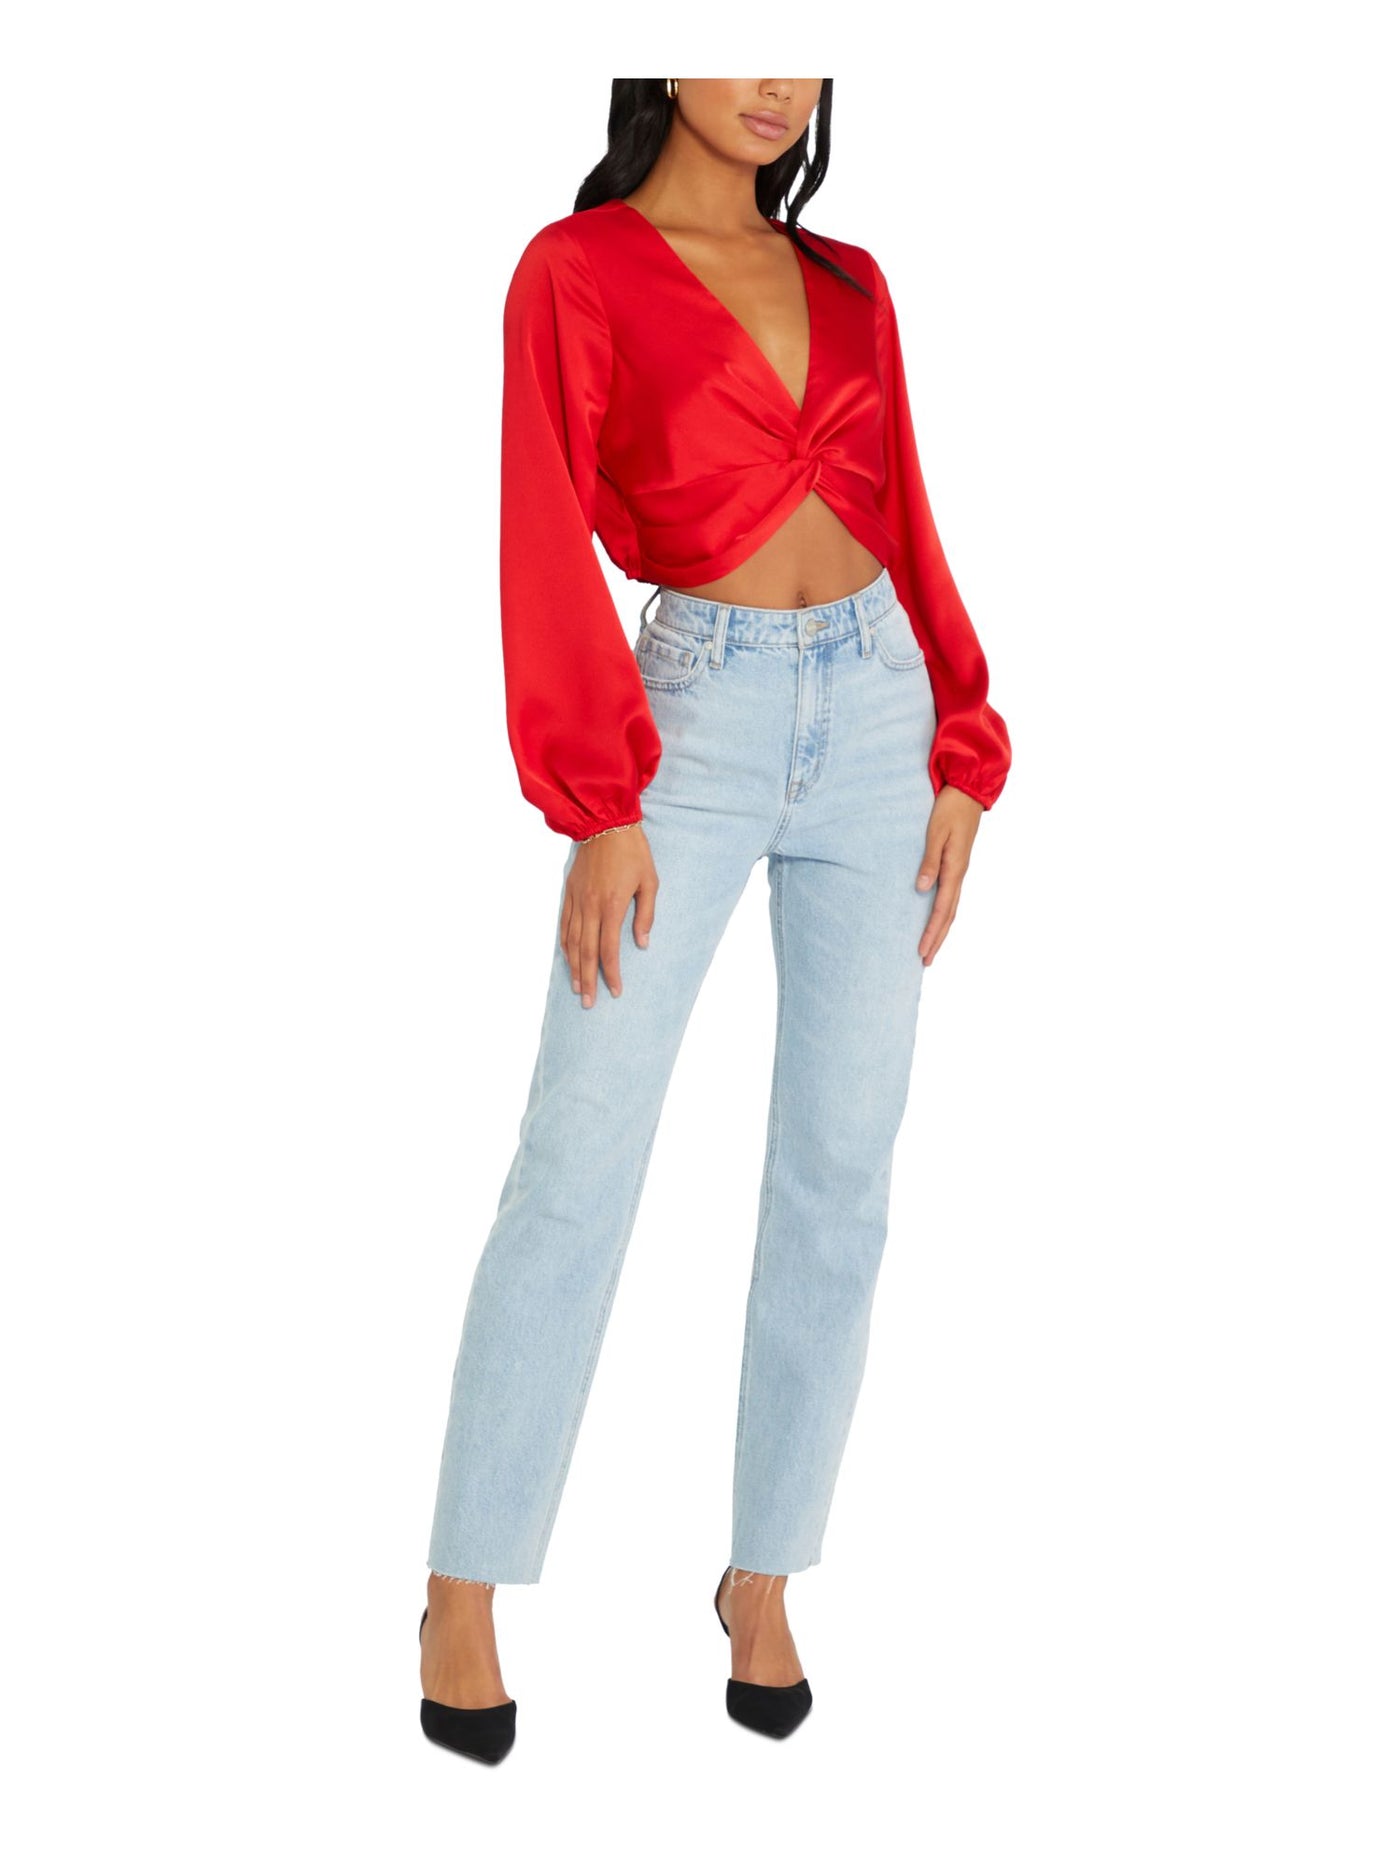 SANCTUARY Womens Red Twist Front Satin Long Sleeve V Neck Crop Top XL